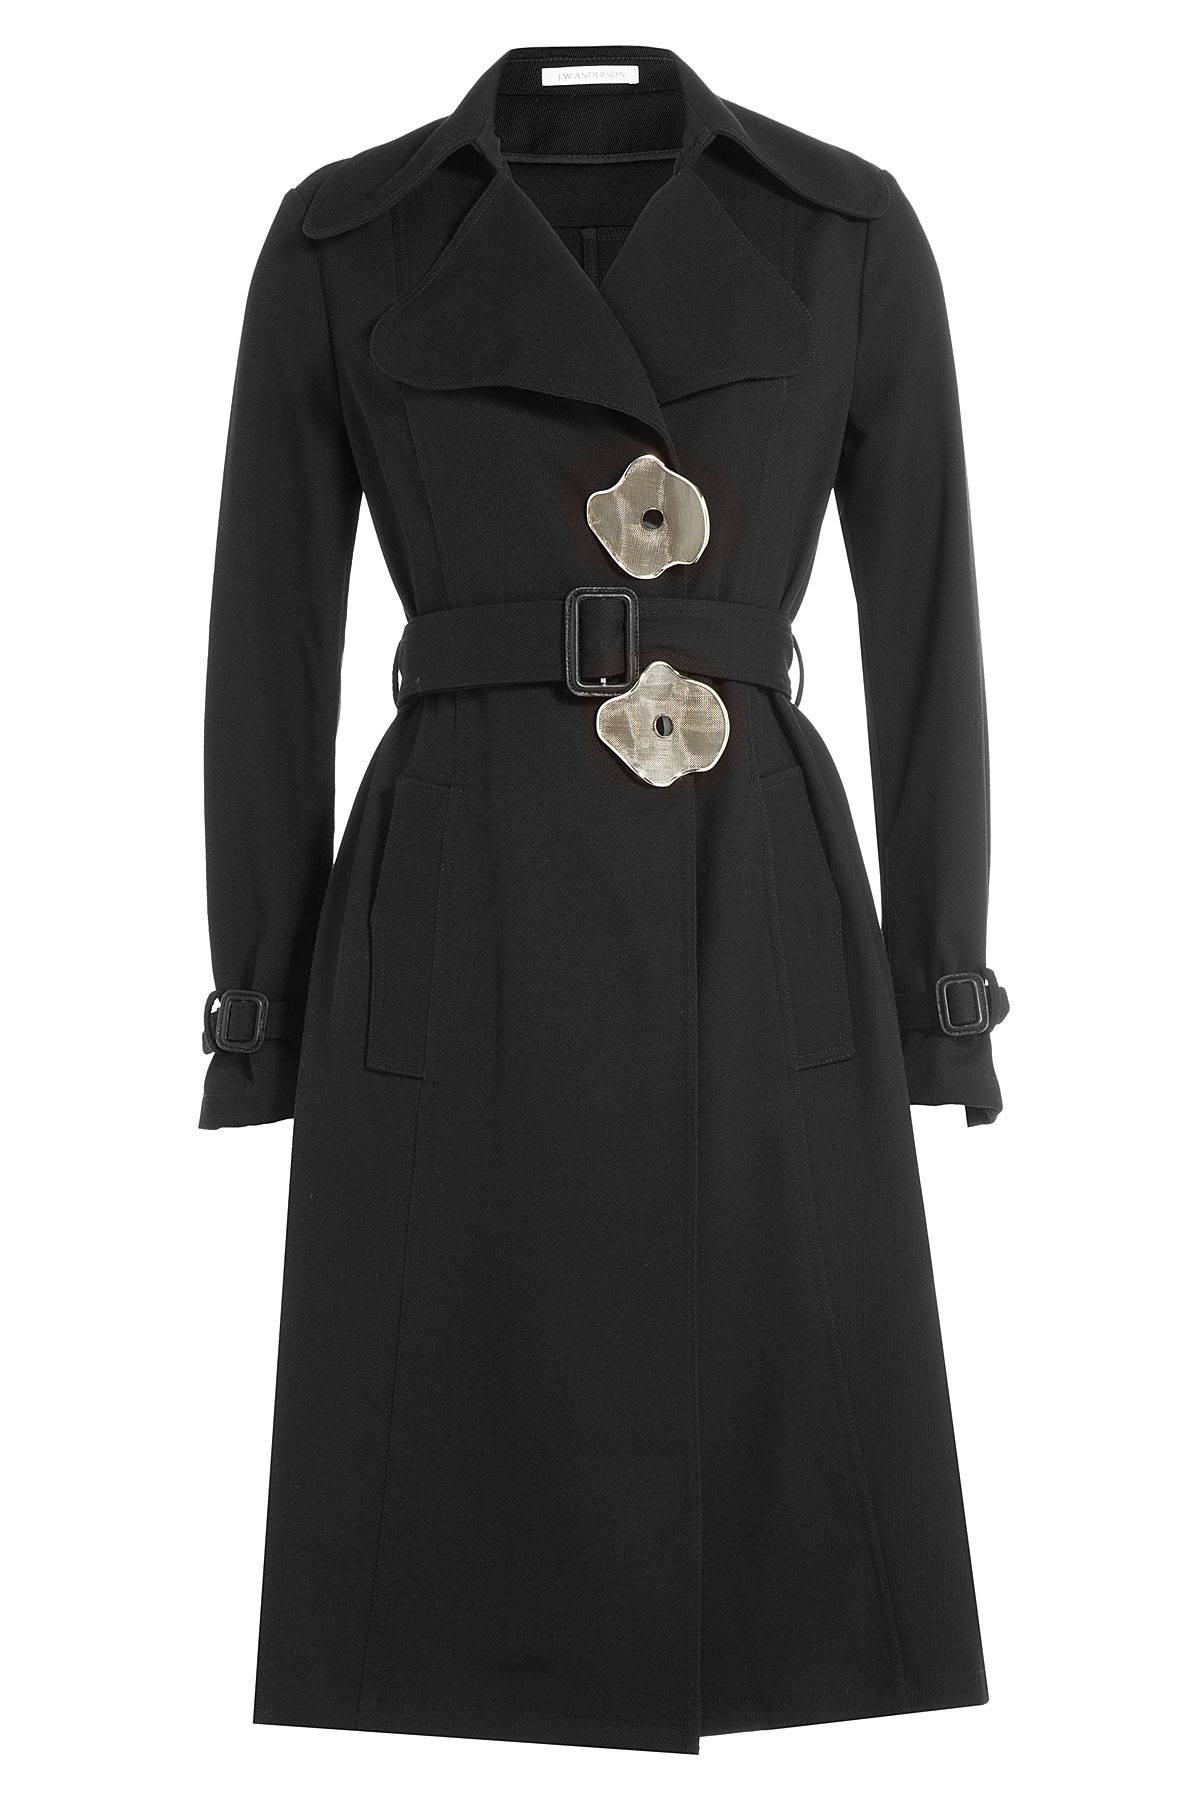 Lyst - J.W.Anderson Trench Coat With Statement Buttons - Black in Black